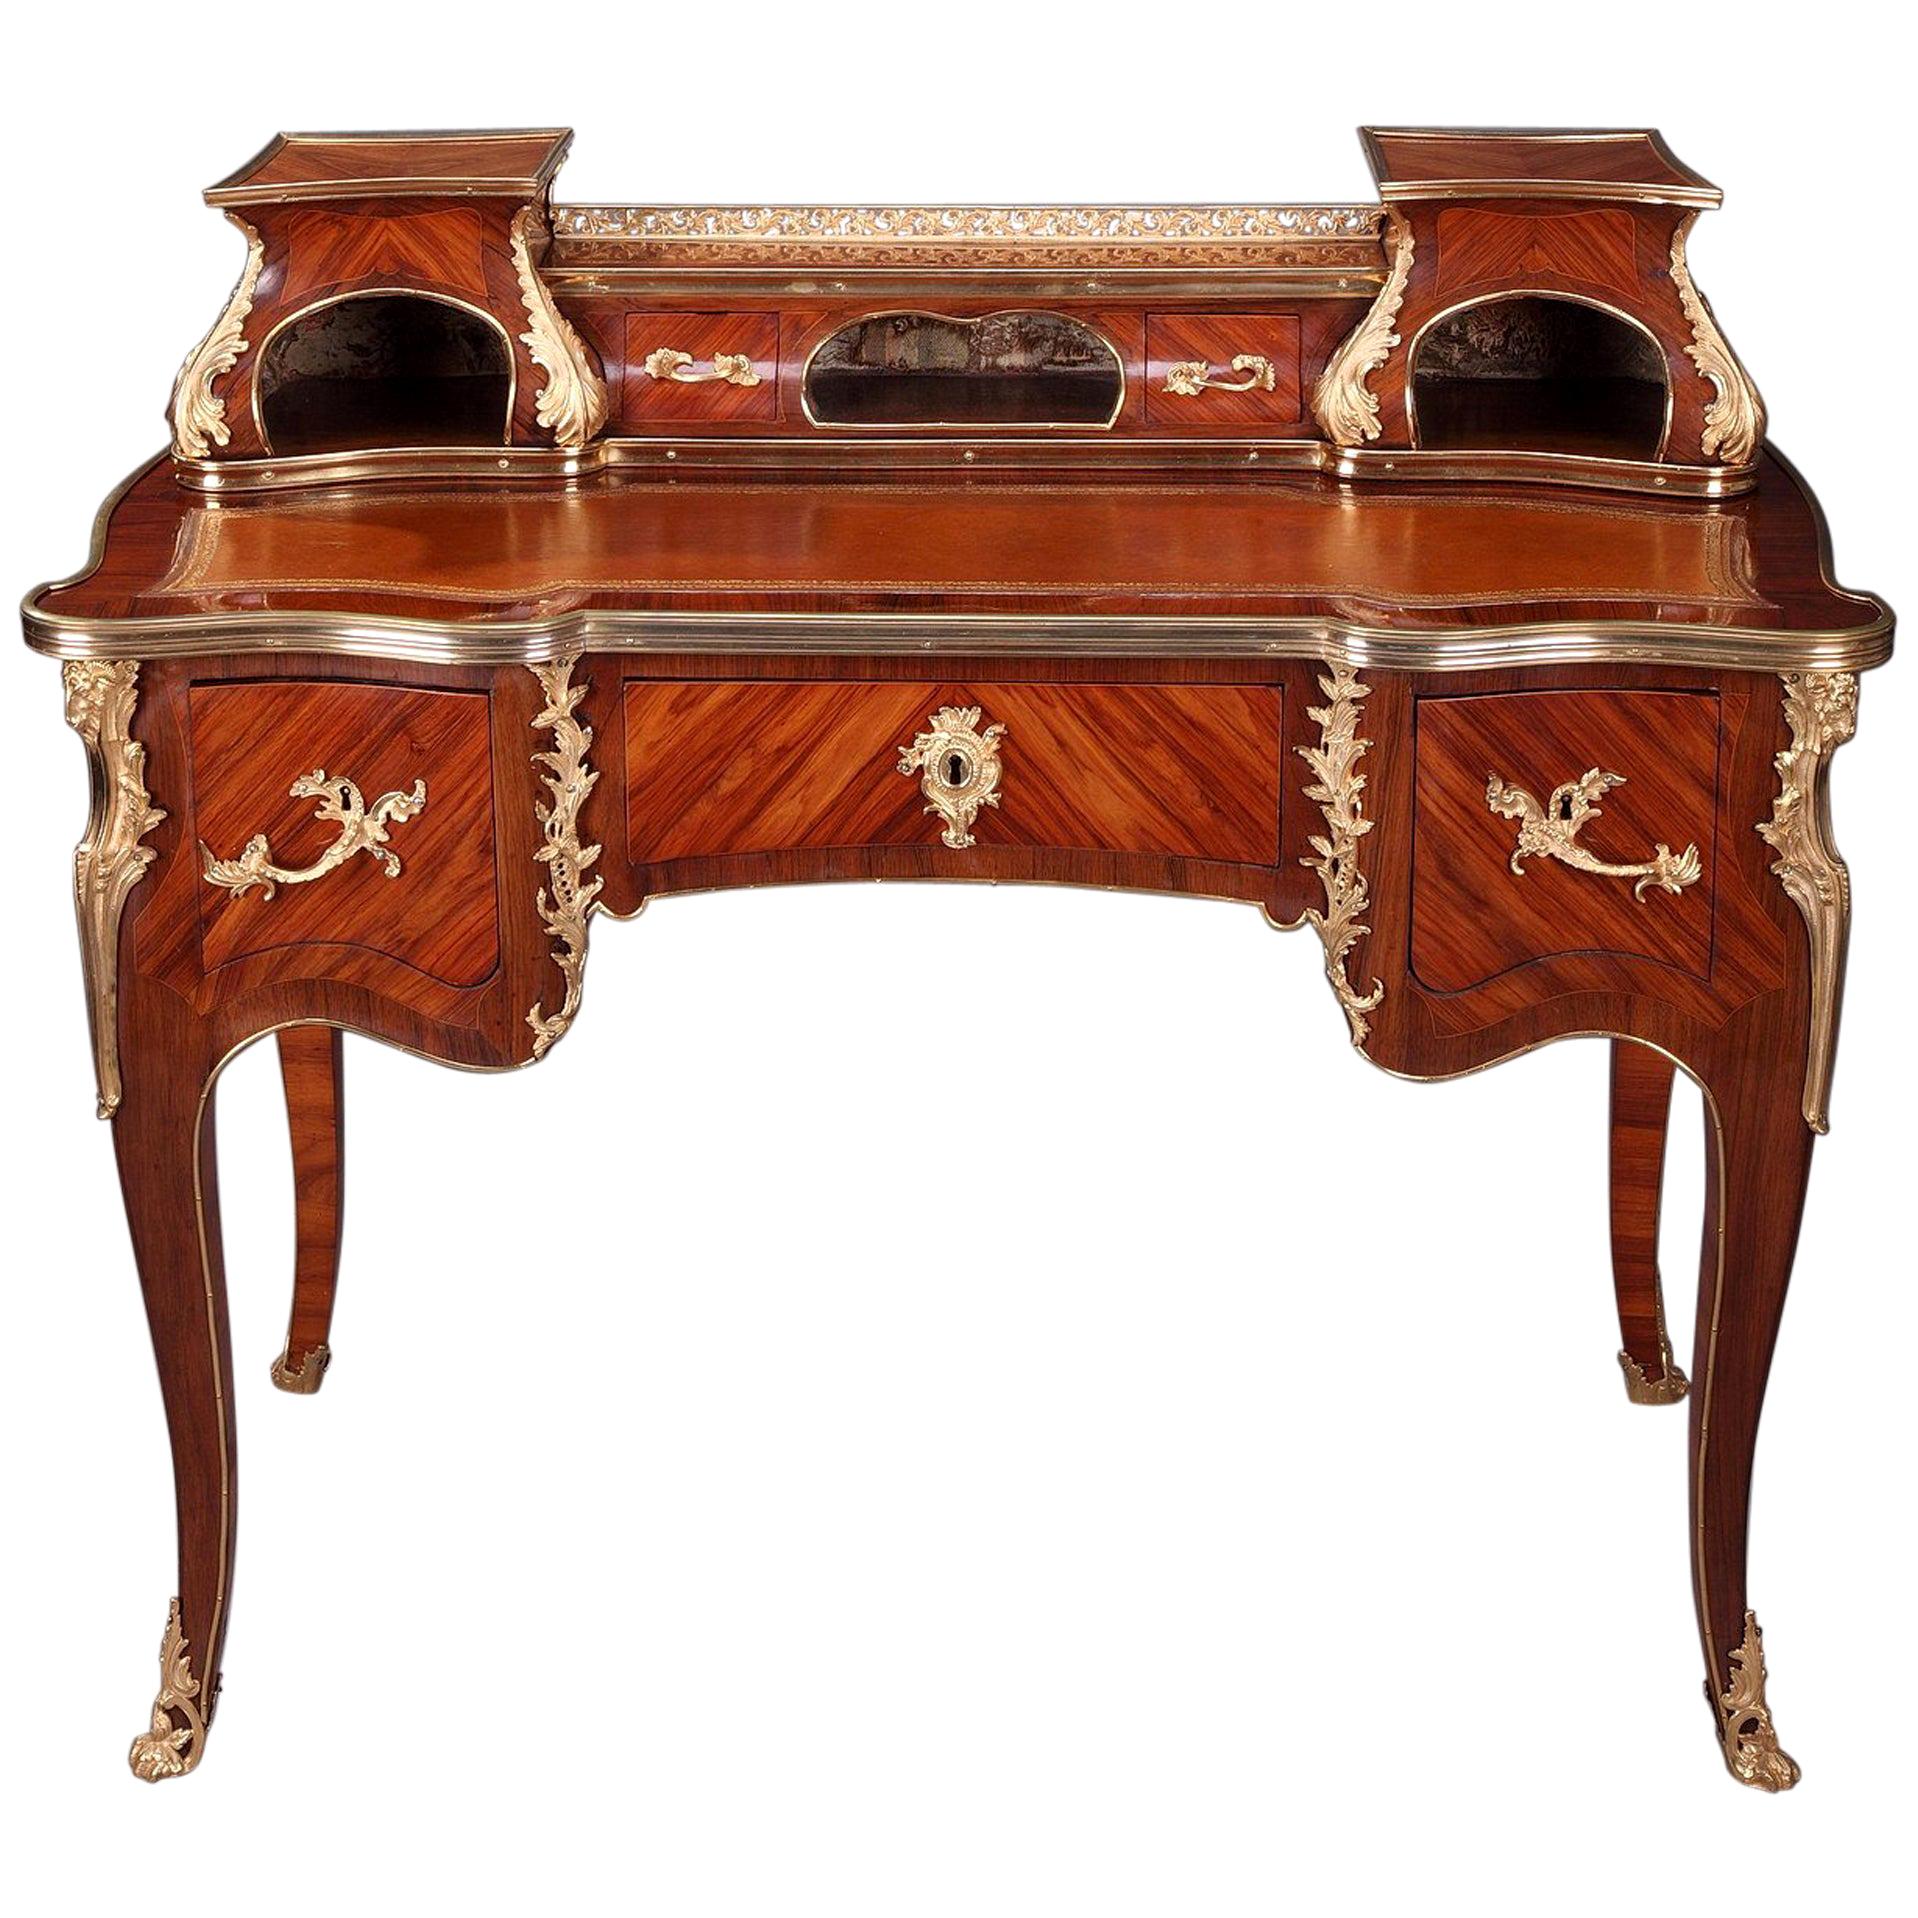 Wood Marquetry Desk in Louis XV Style